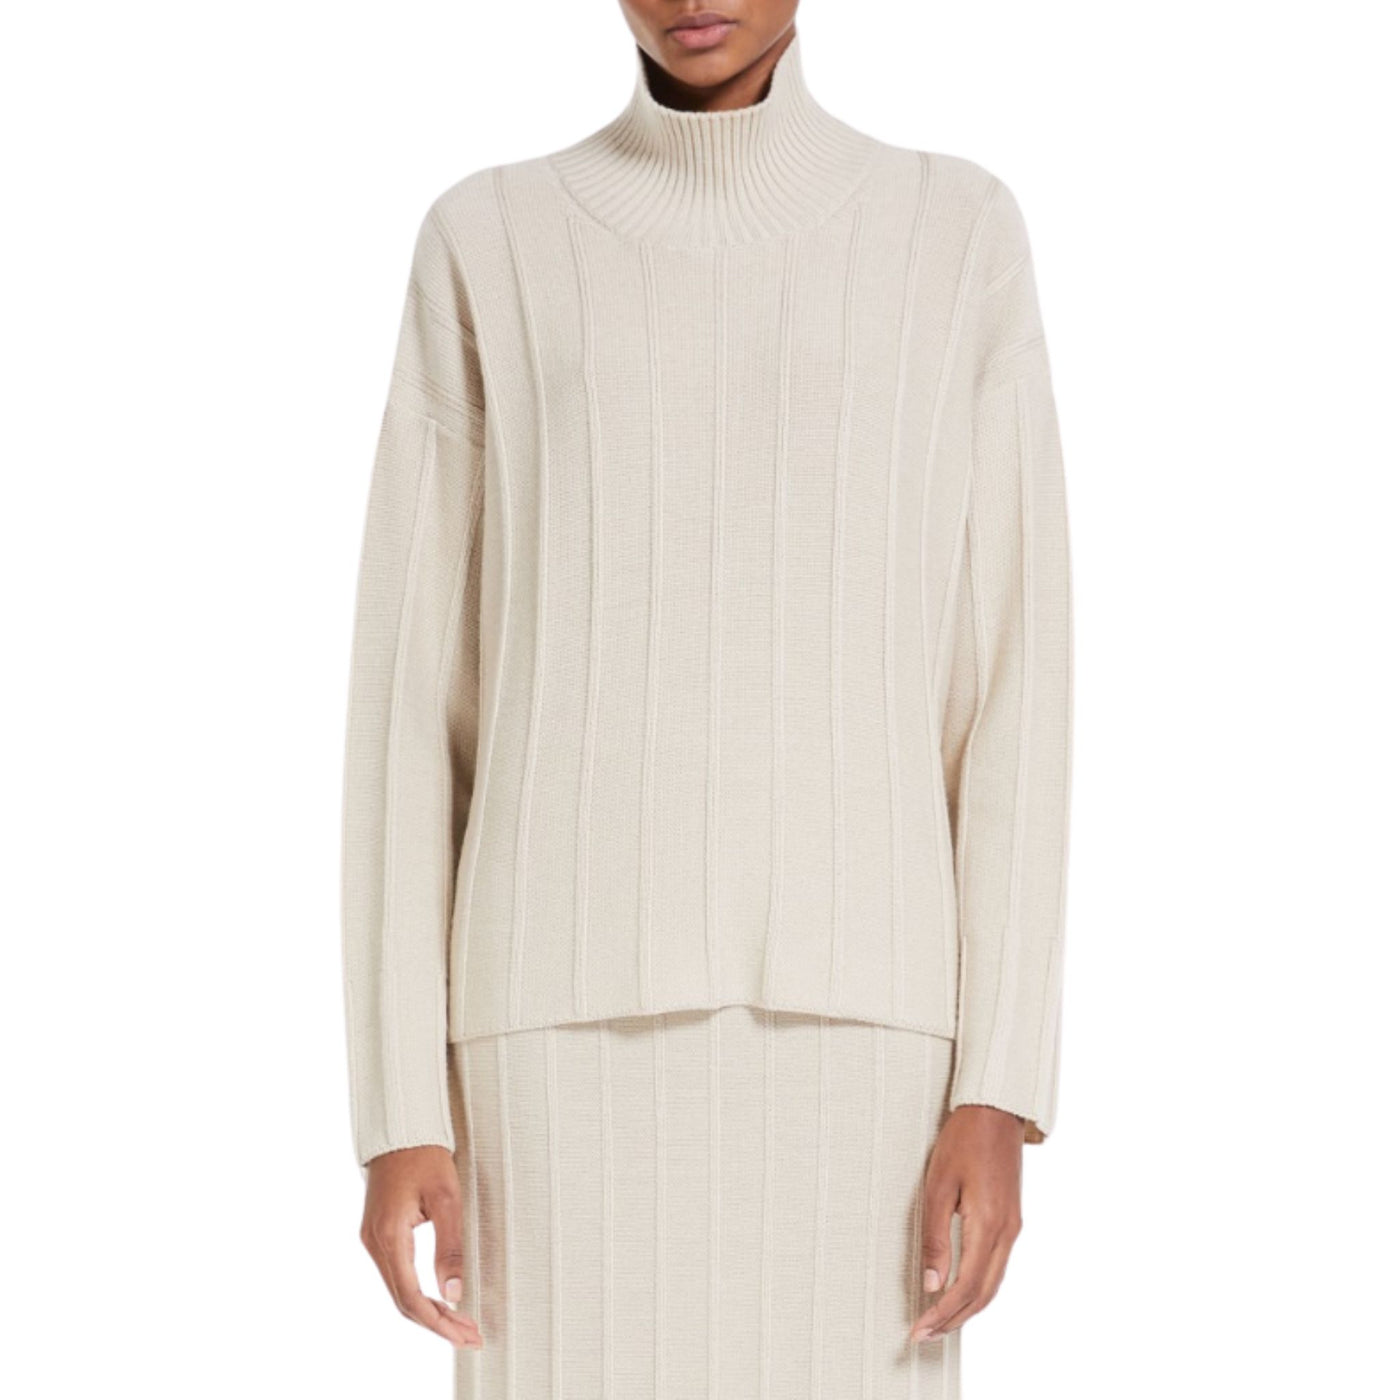 Women's sweater with ribbed high collar